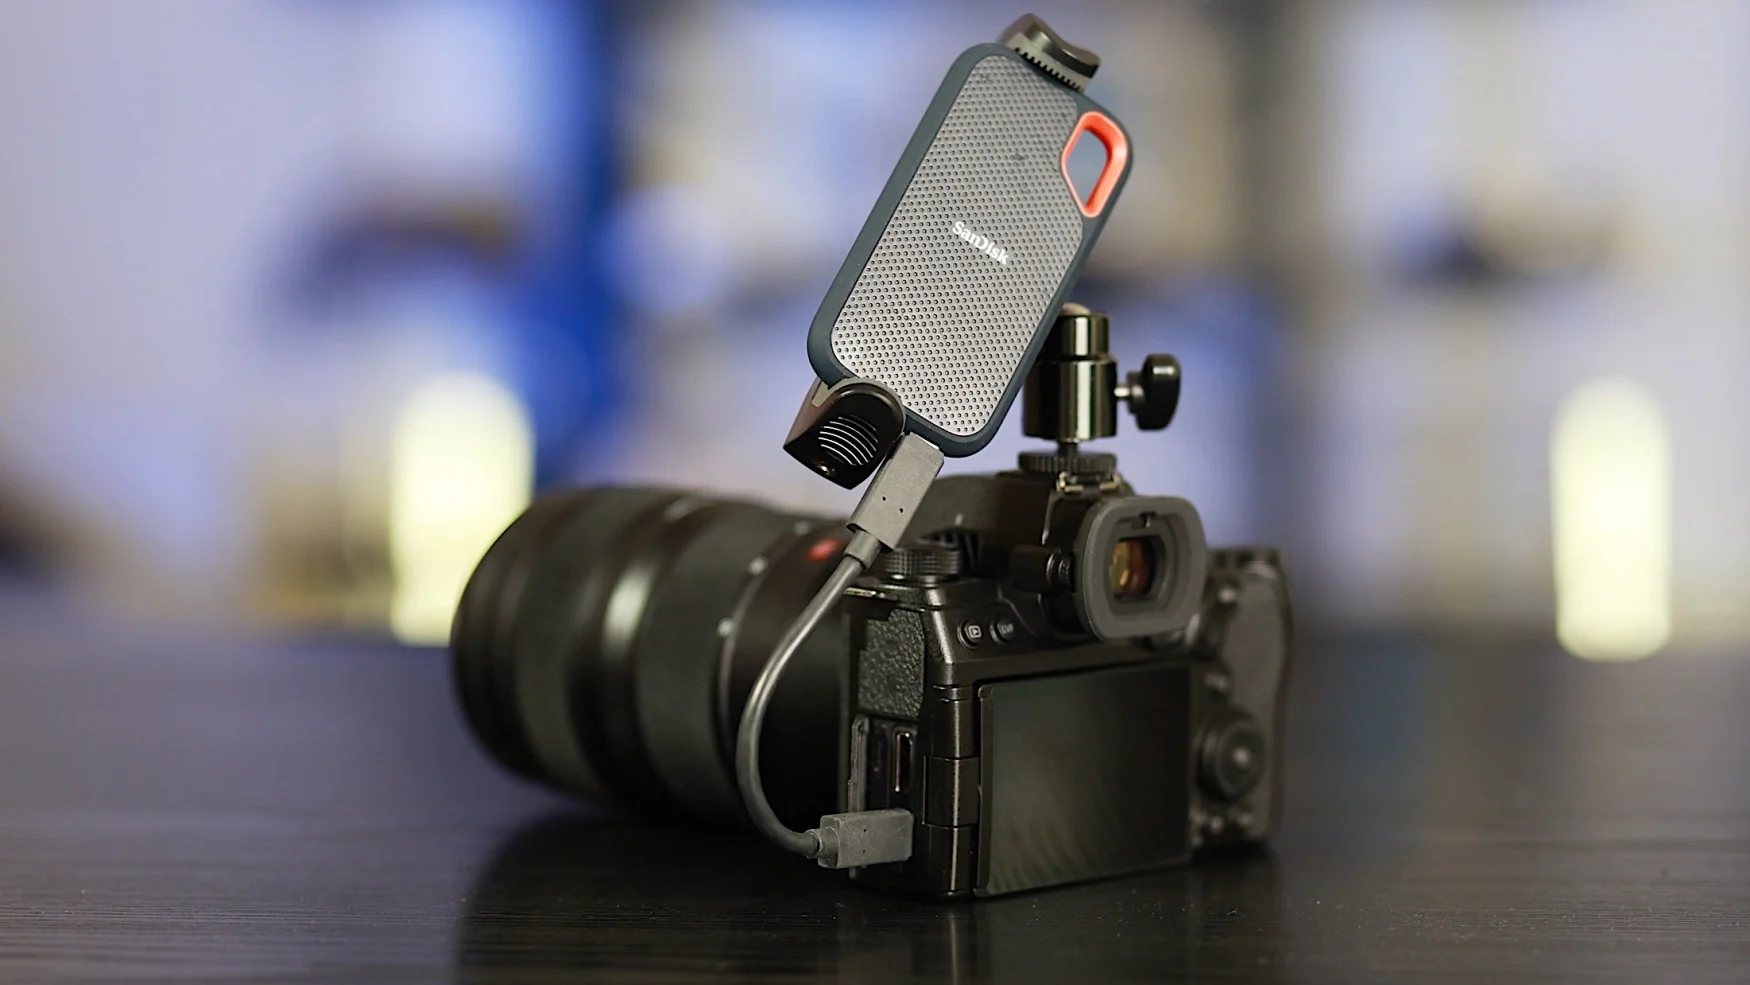 Panasonic S5IIX review: Power and value in one package for vlogging